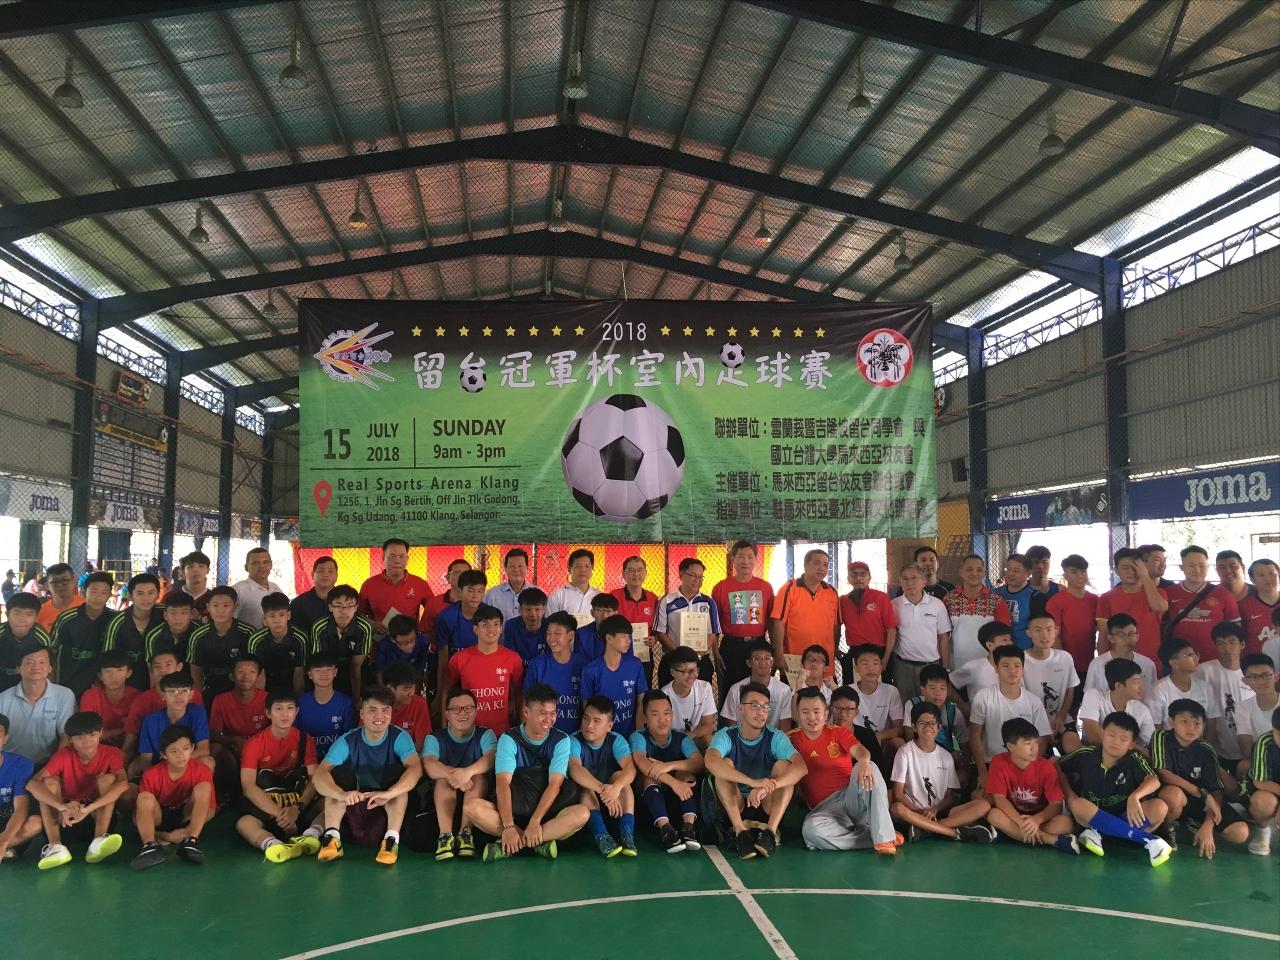 Deputy Representative Michael S.Y.Yiin attends 2018 Taiwan University Alumni Championship Cup Indoor Football Tournament with VIP and Participant team take photograph together.